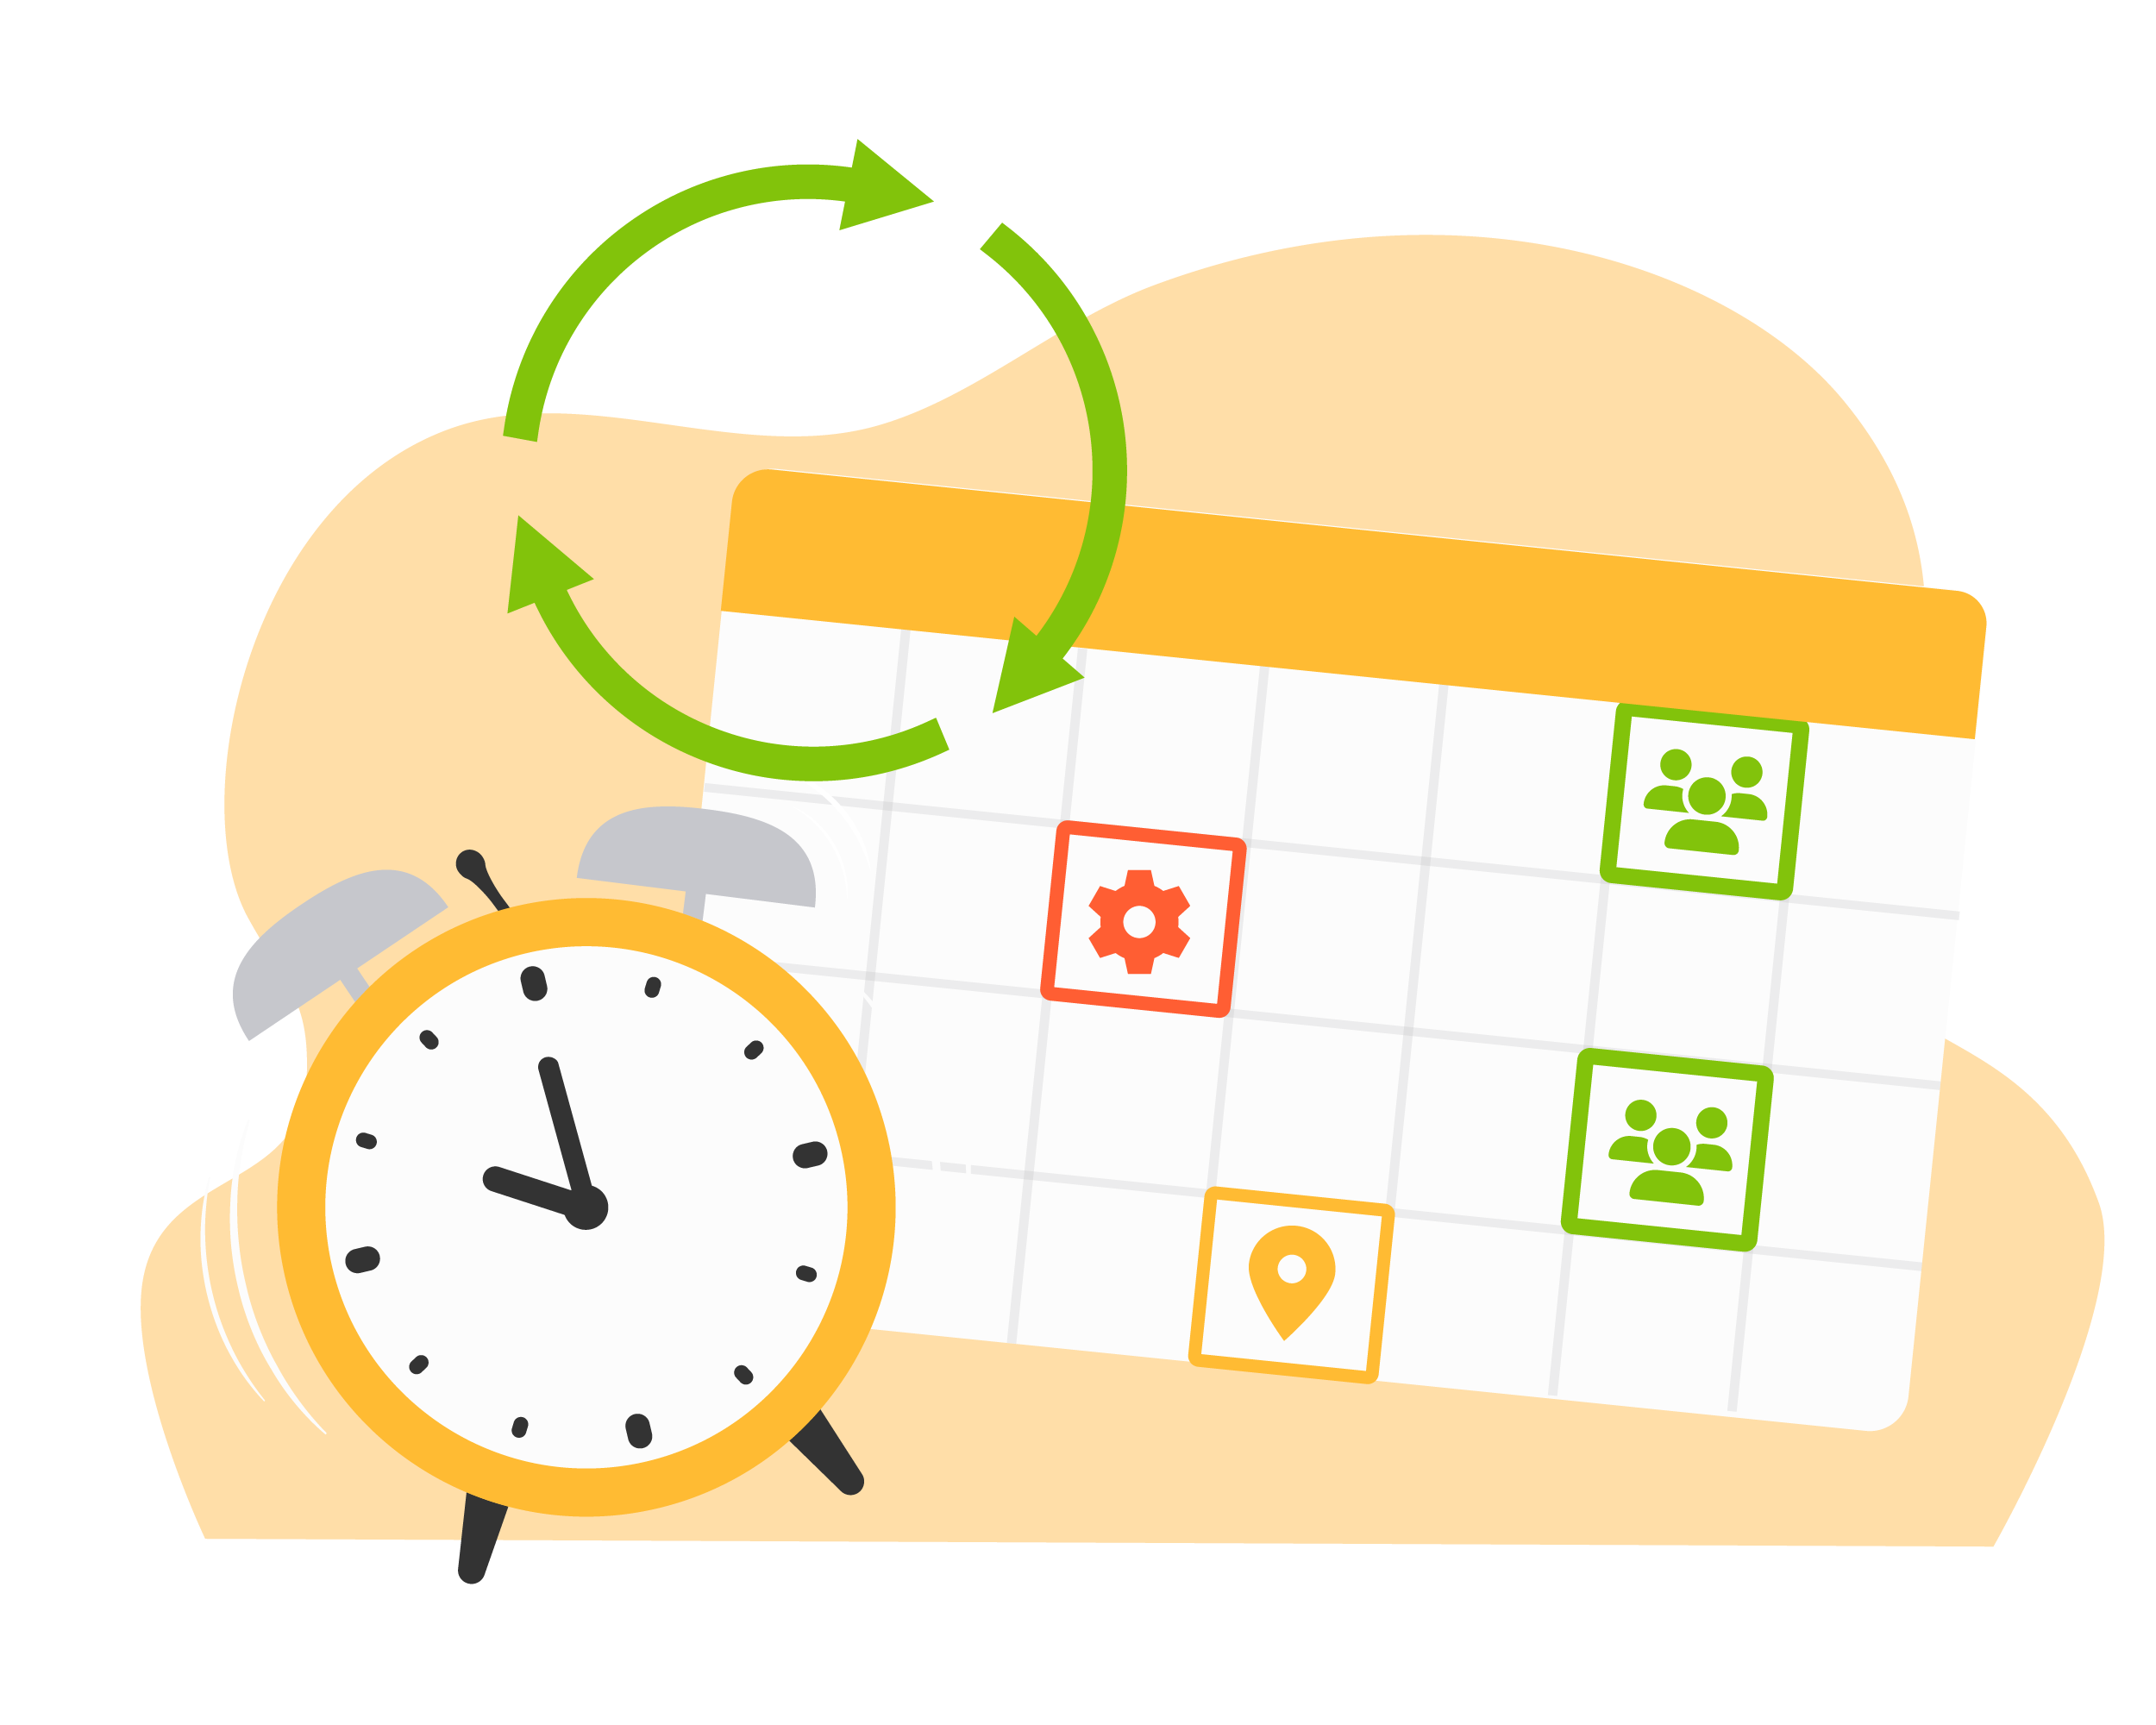 Illustration showing a calender with different appointments.